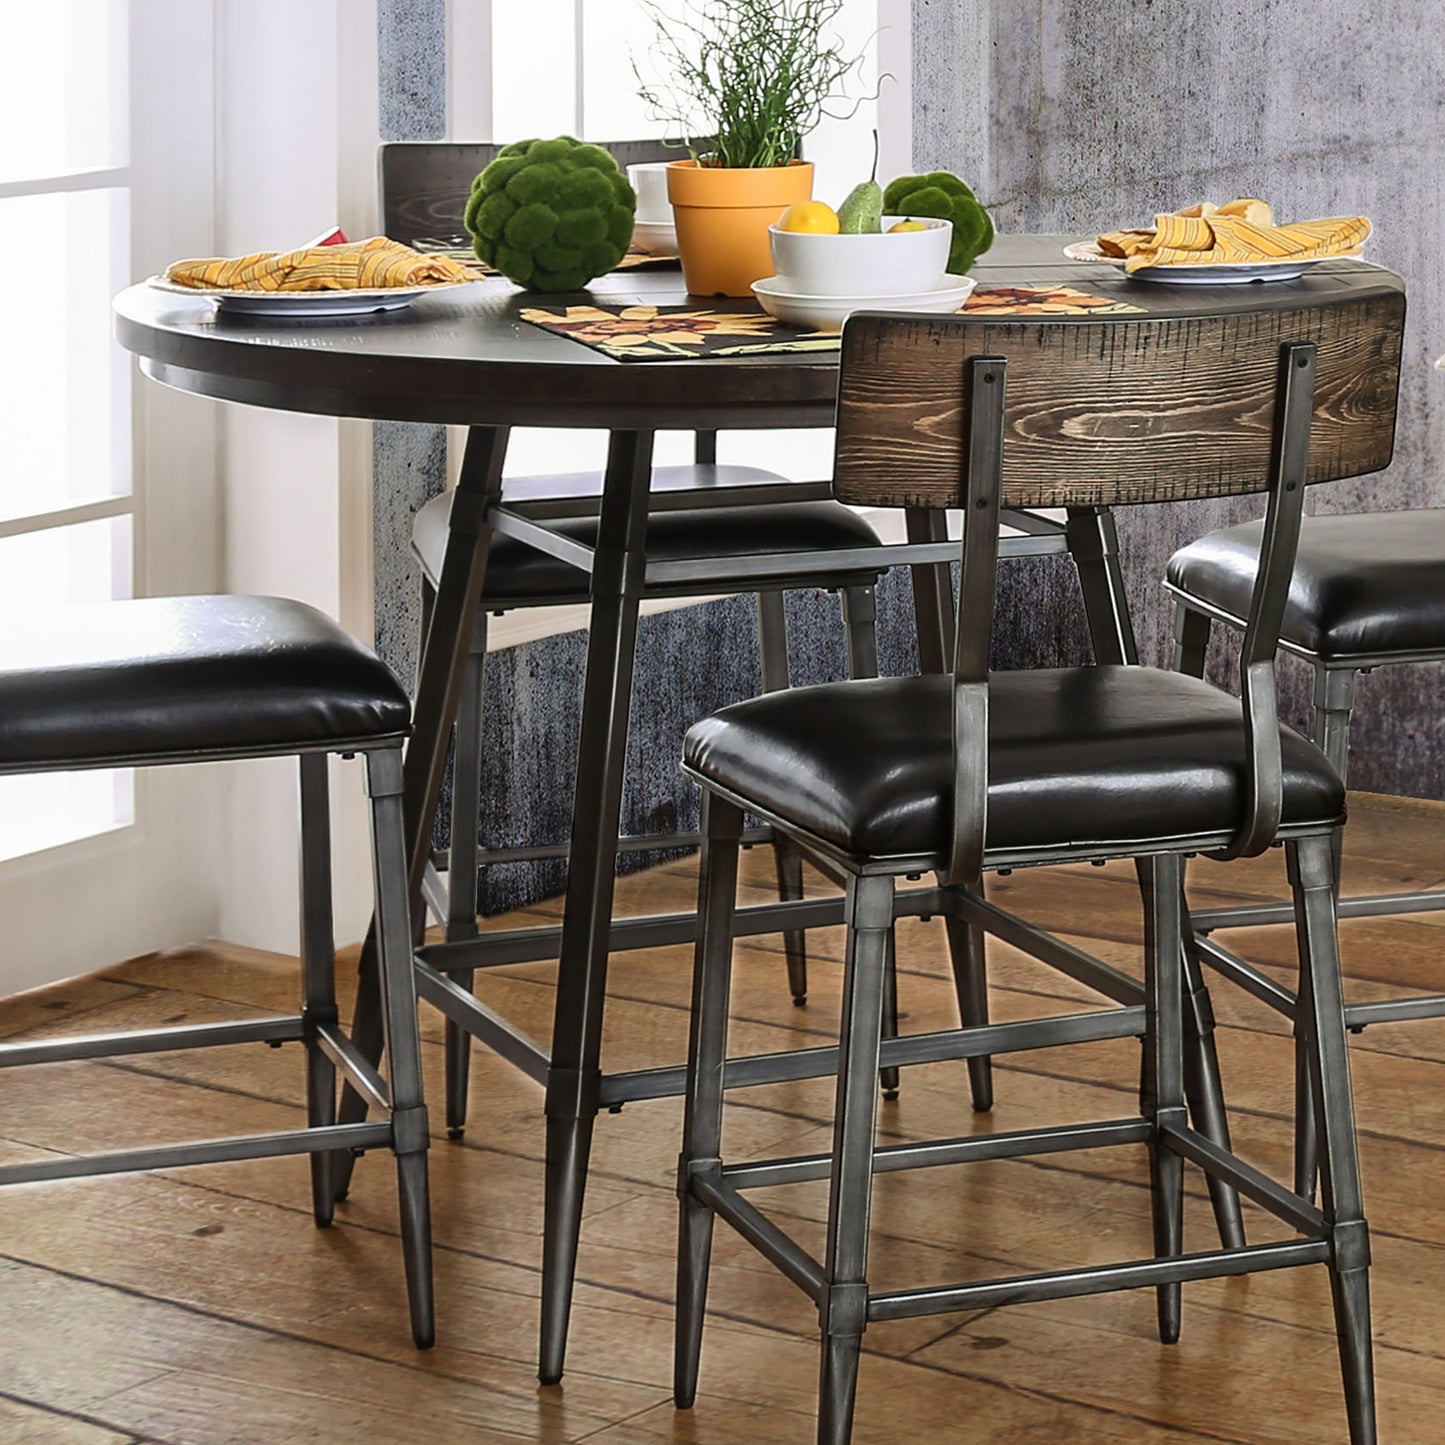 Angled rustic industrial weathered gray and rustic dark oak counter height round dining table in a dining area with chairs and accessories